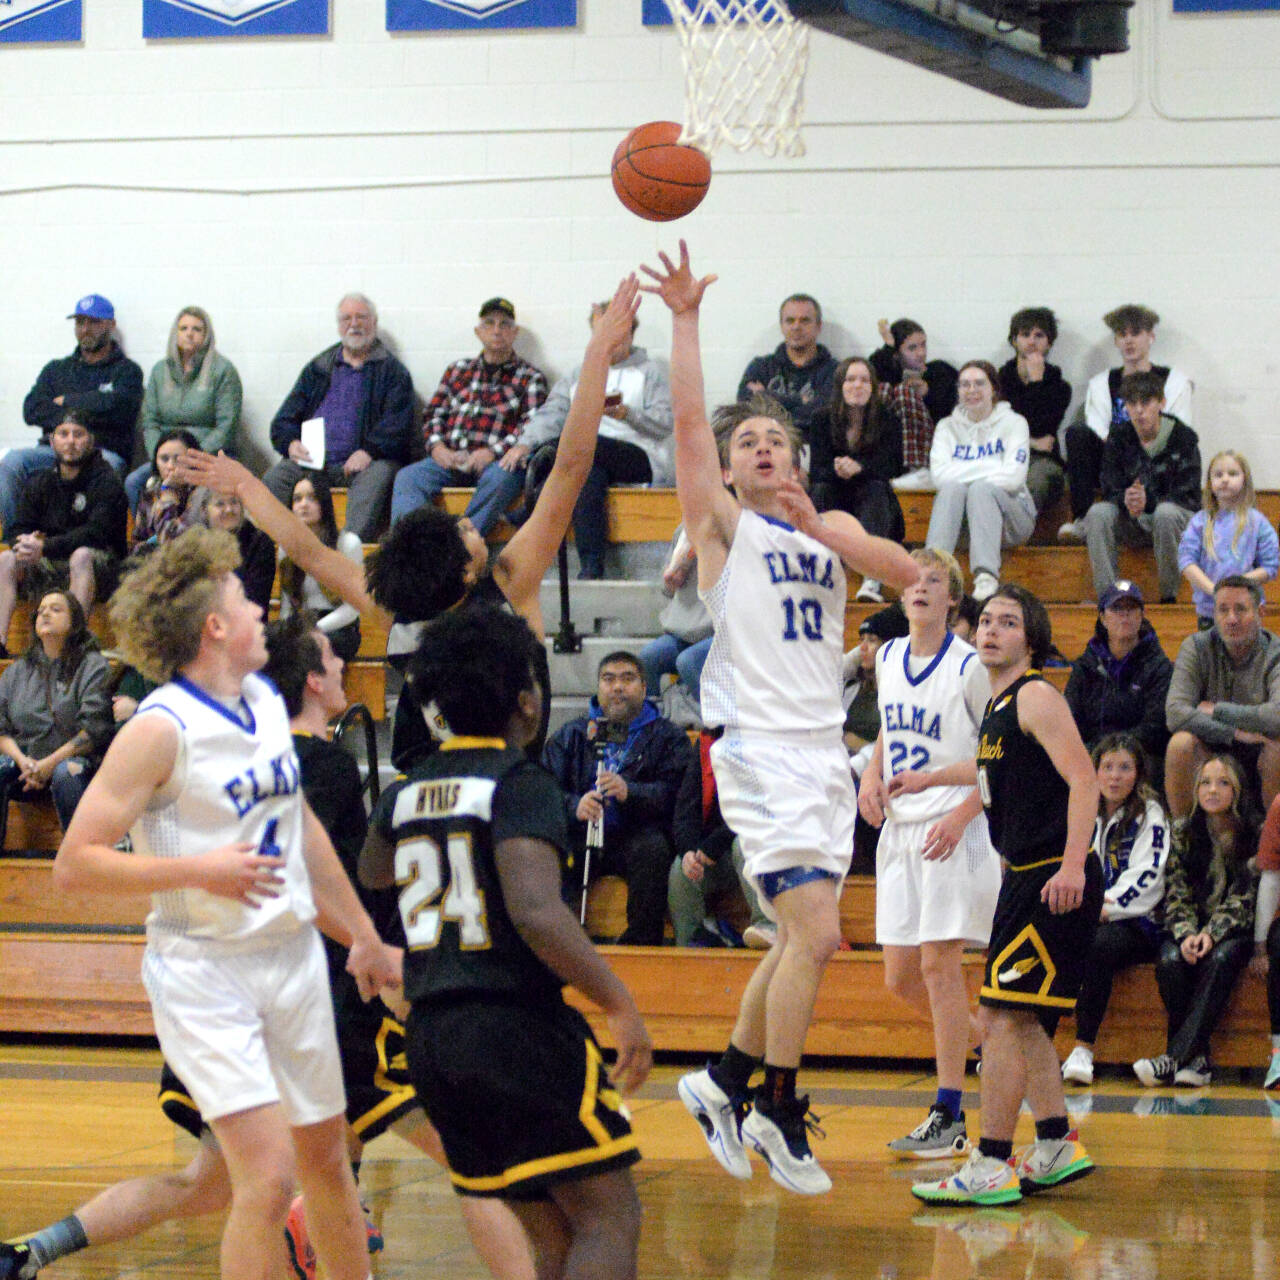 RYAN SPARKS | THE DAILY WORLD Elma’s Traden Carter (10) puts up a shot during the Eagles’ 65-24 victory over North Beach on Wednesday, Nov. 30, 2022 at Elma High School.